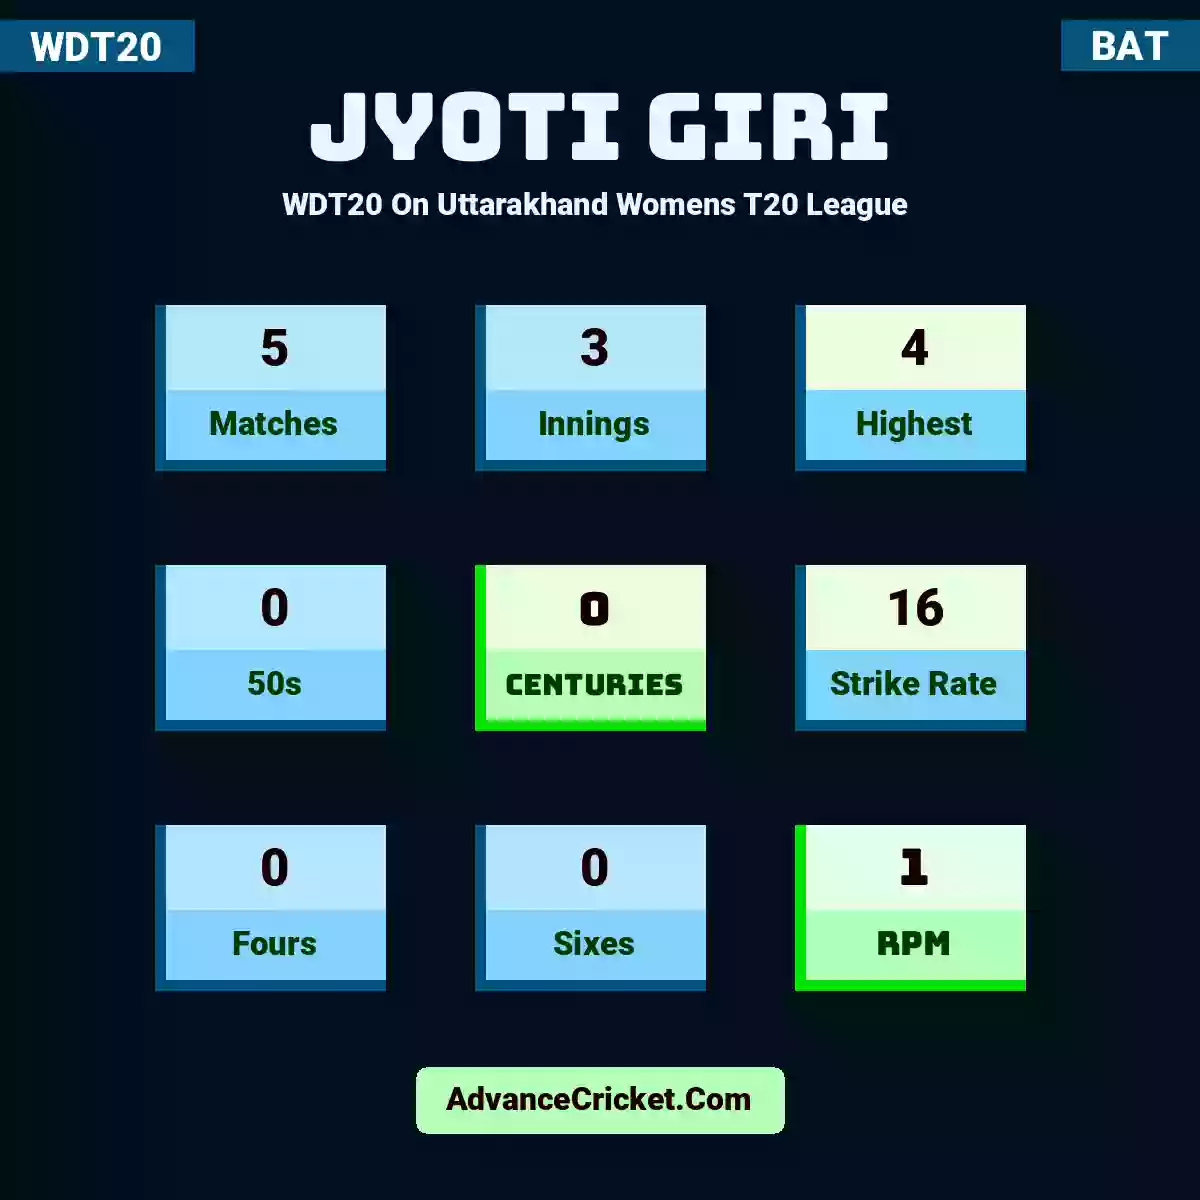 Jyoti Giri WDT20  On Uttarakhand Womens T20 League , Jyoti Giri played 5 matches, scored 4 runs as highest, 0 half-centuries, and 0 centuries, with a strike rate of 16. J.Giri hit 0 fours and 0 sixes, with an RPM of 1.